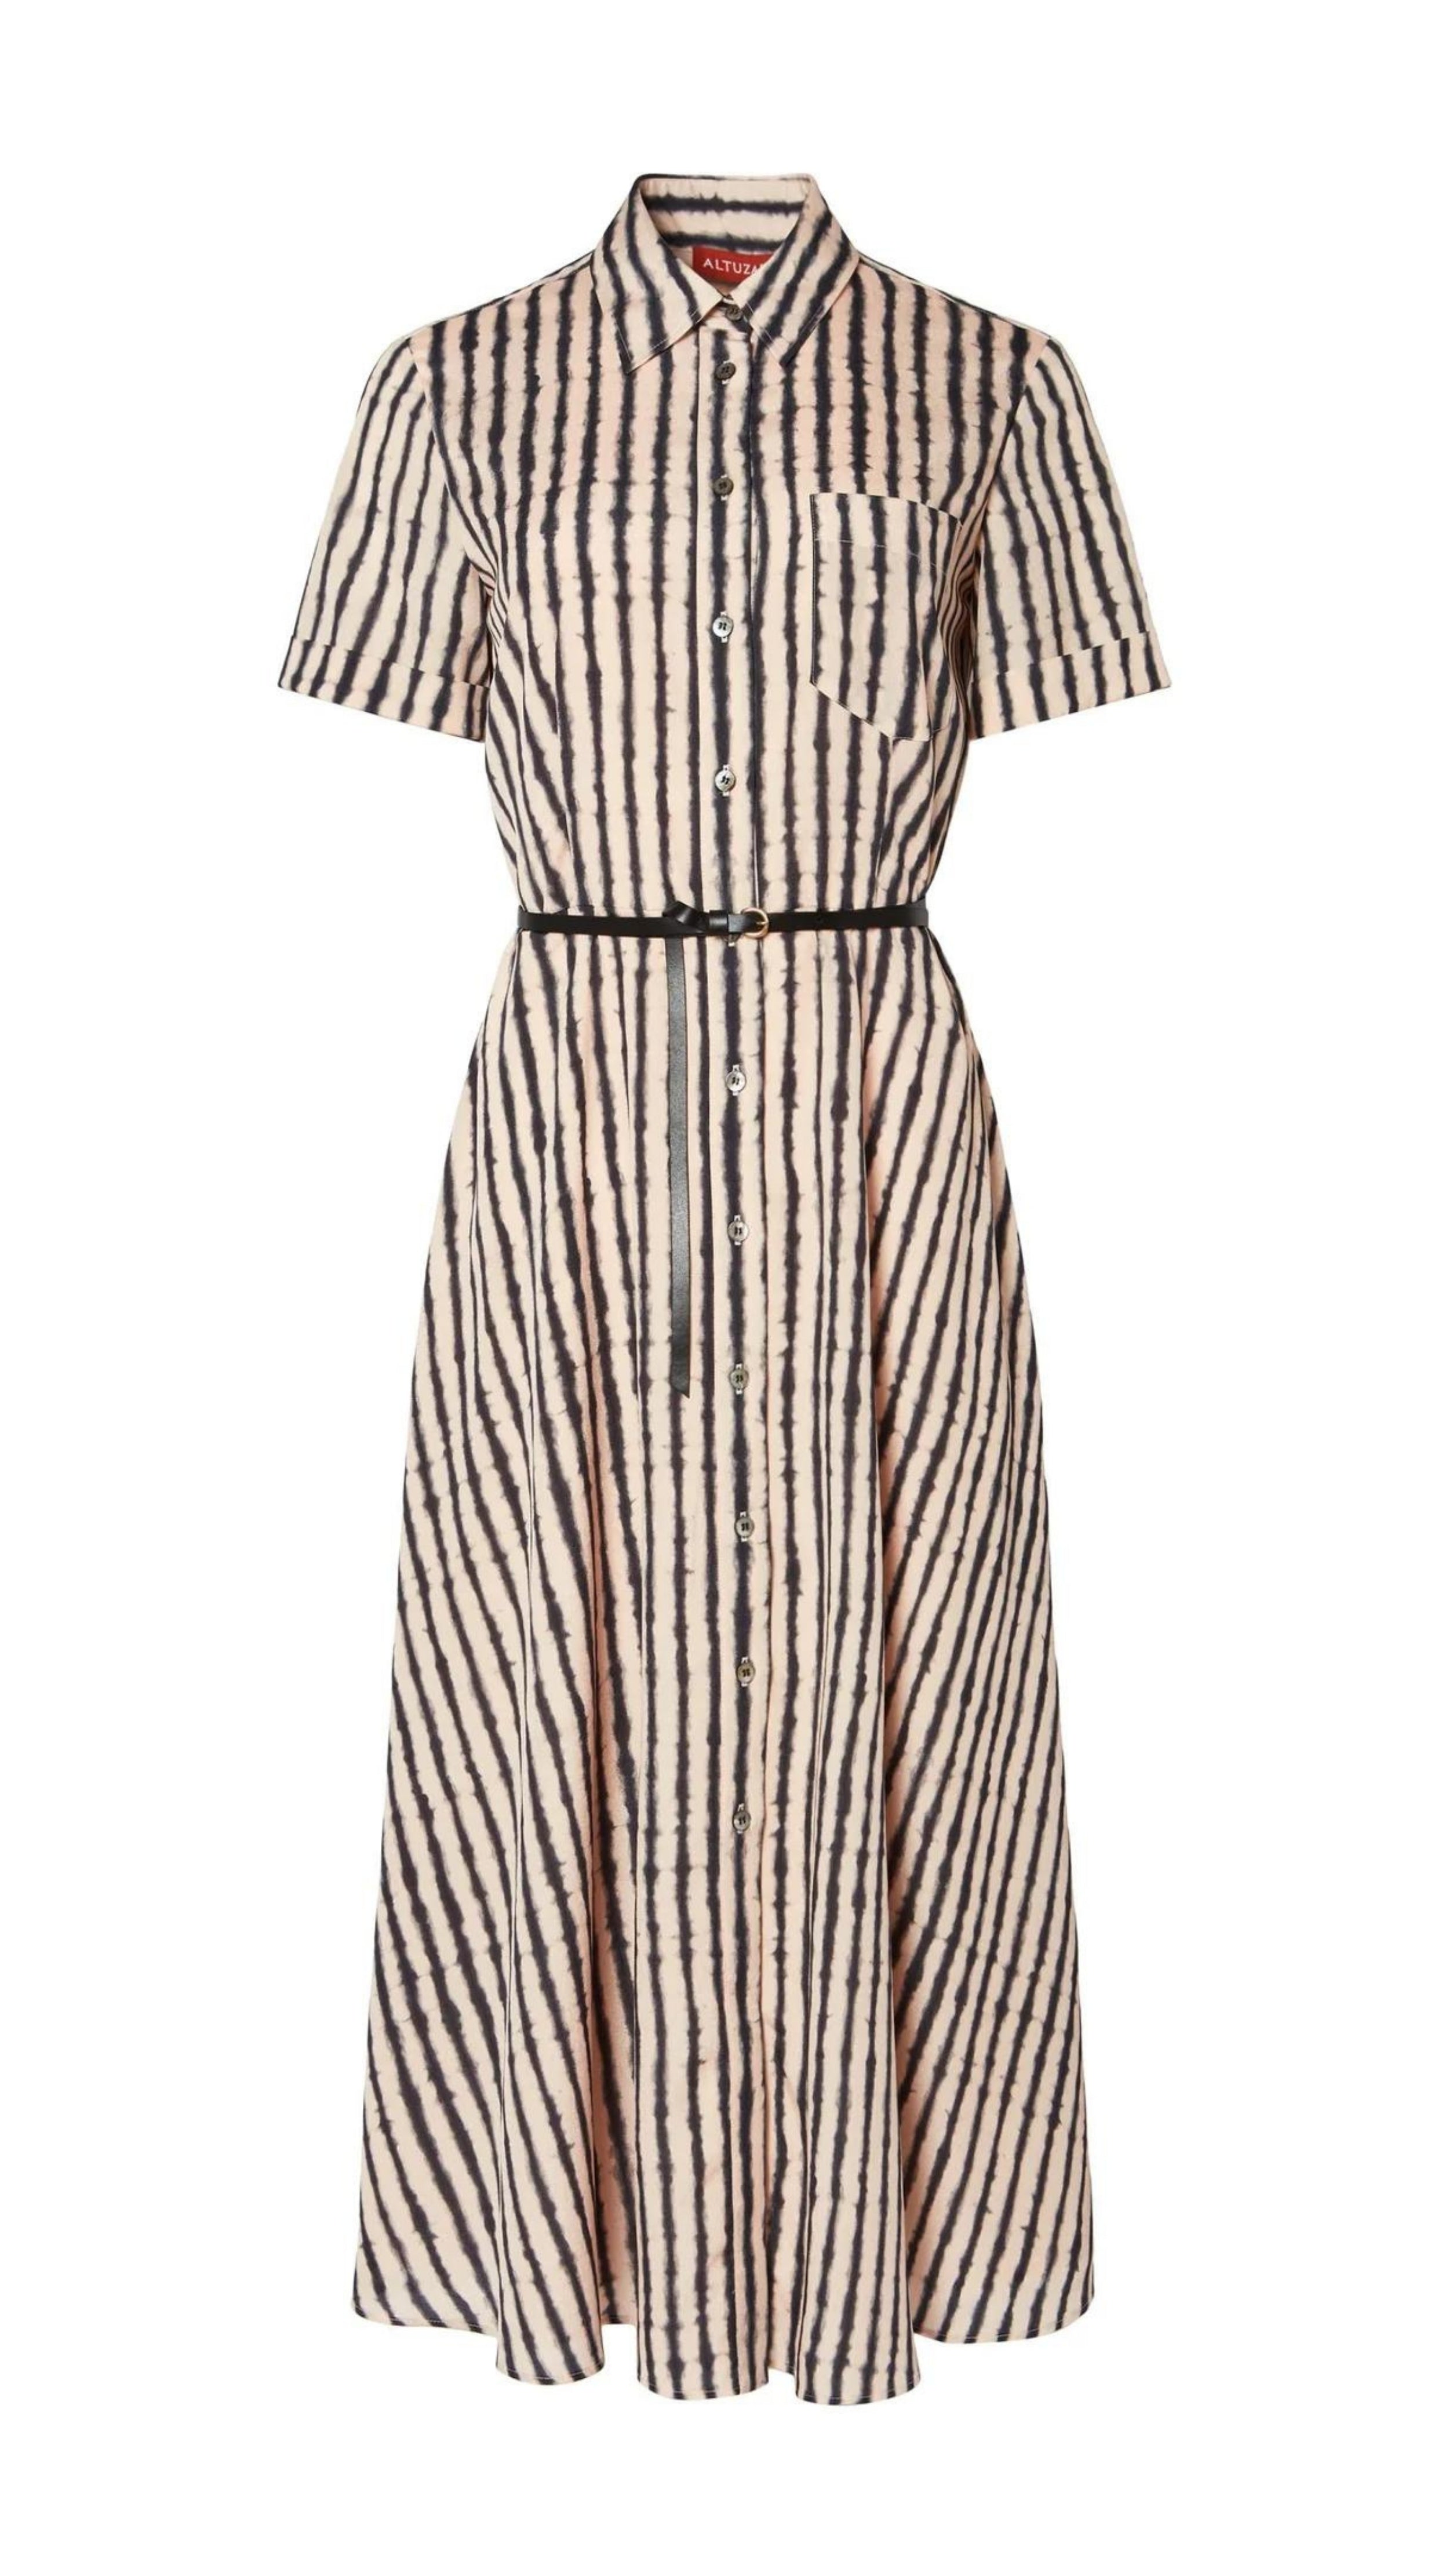 Altuzarra Kiera Dress The 'Kiera' dress is designed with a small point collar, short sleeves and a flattering A-line skirt. It is detailed with a slim leather waist belt and features a black and white stripe pattern and a front breast pocket. Product photo facing front.